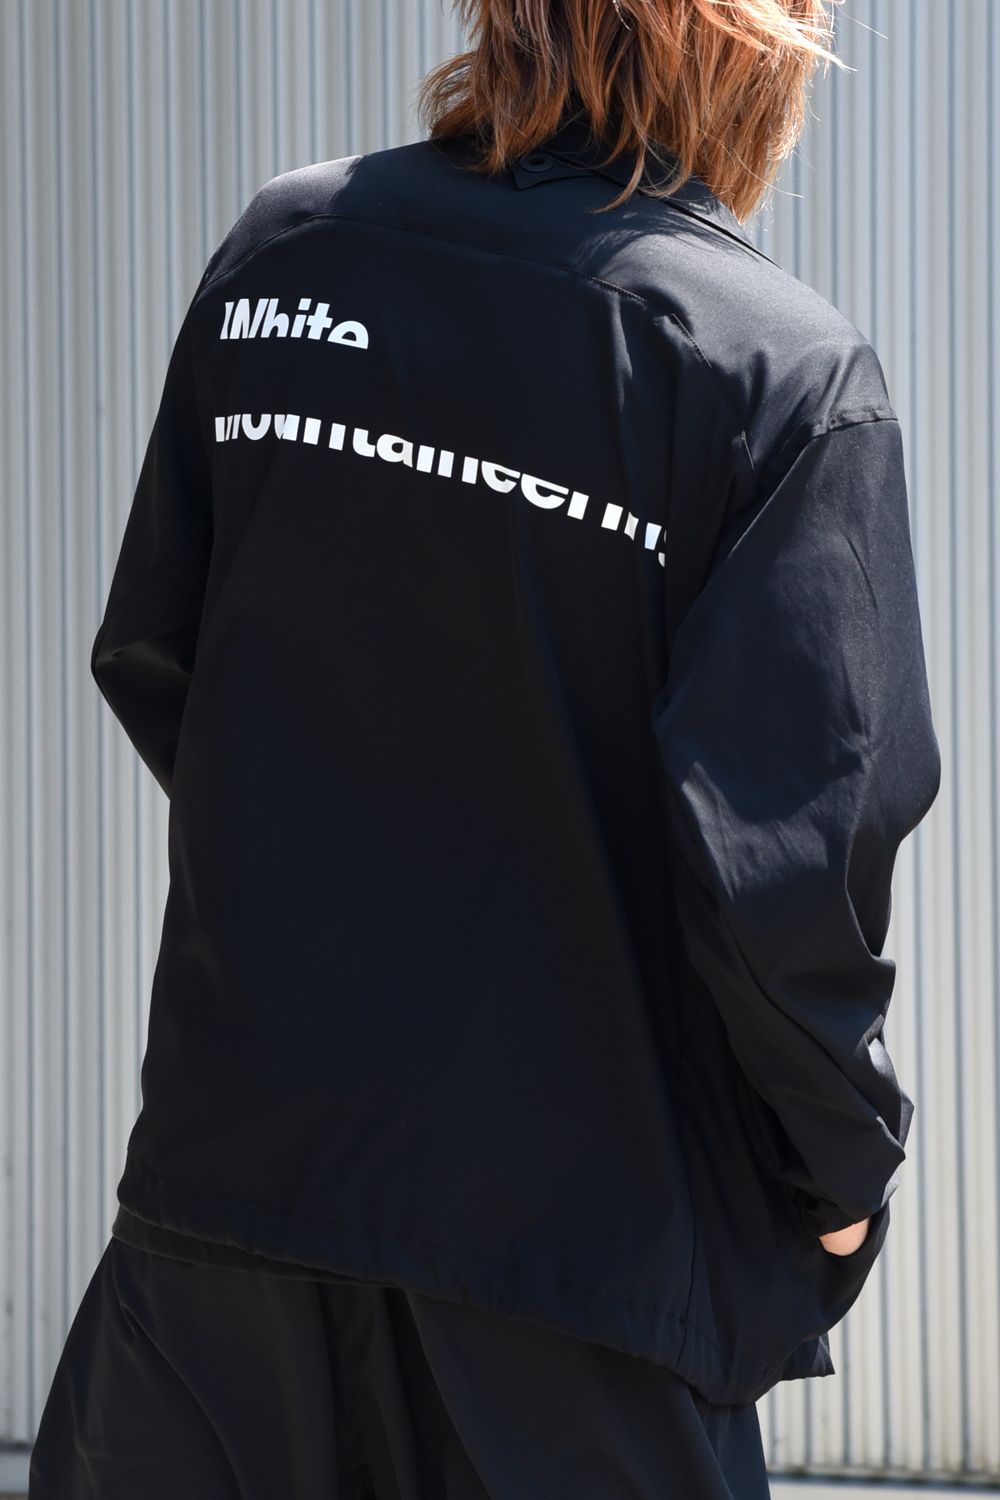 White Mountaineering - STRETCHED TWILL COACH JACKET / ロゴ 